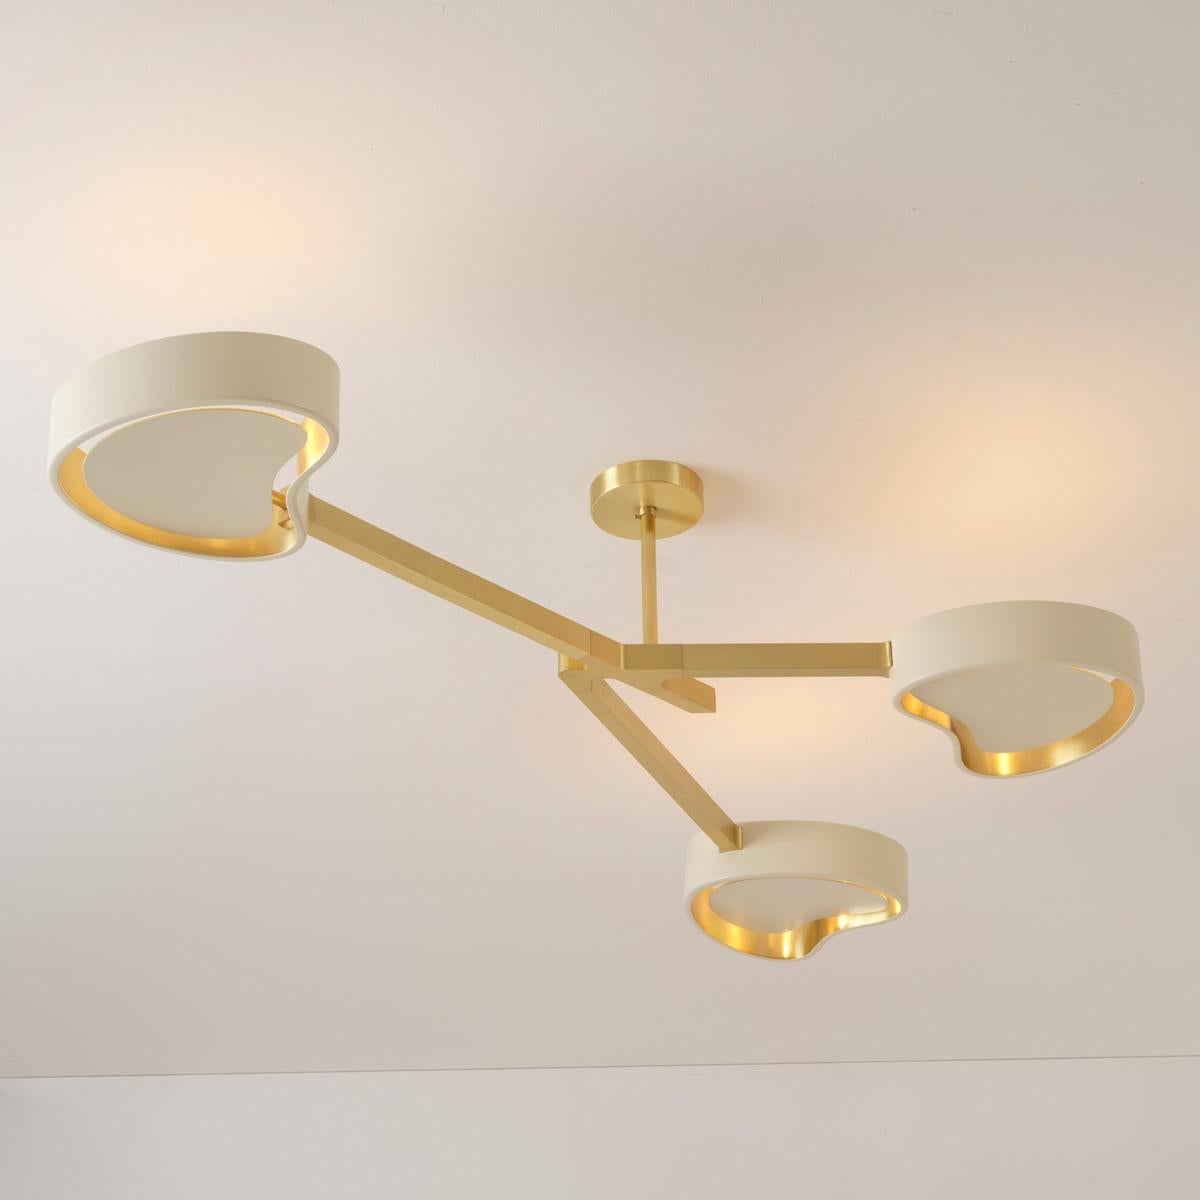 Cuore N.3 Ceiling Light by Gaspare Asaro. Bronze Finish For Sale 1